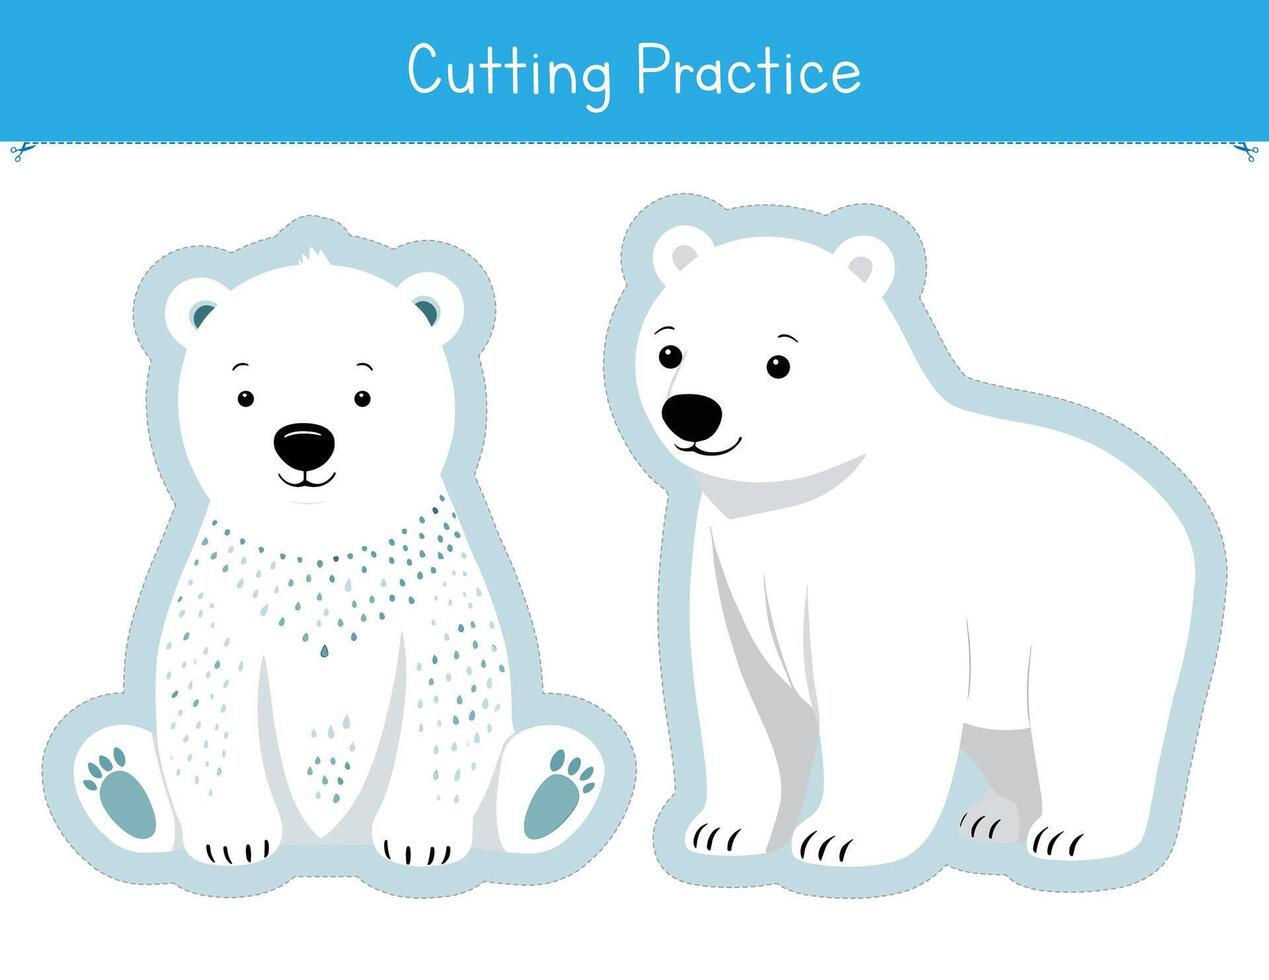 Cutting practice activity for preschool and kindergarten kids with two cute baby polar bears. Educational game for children vector